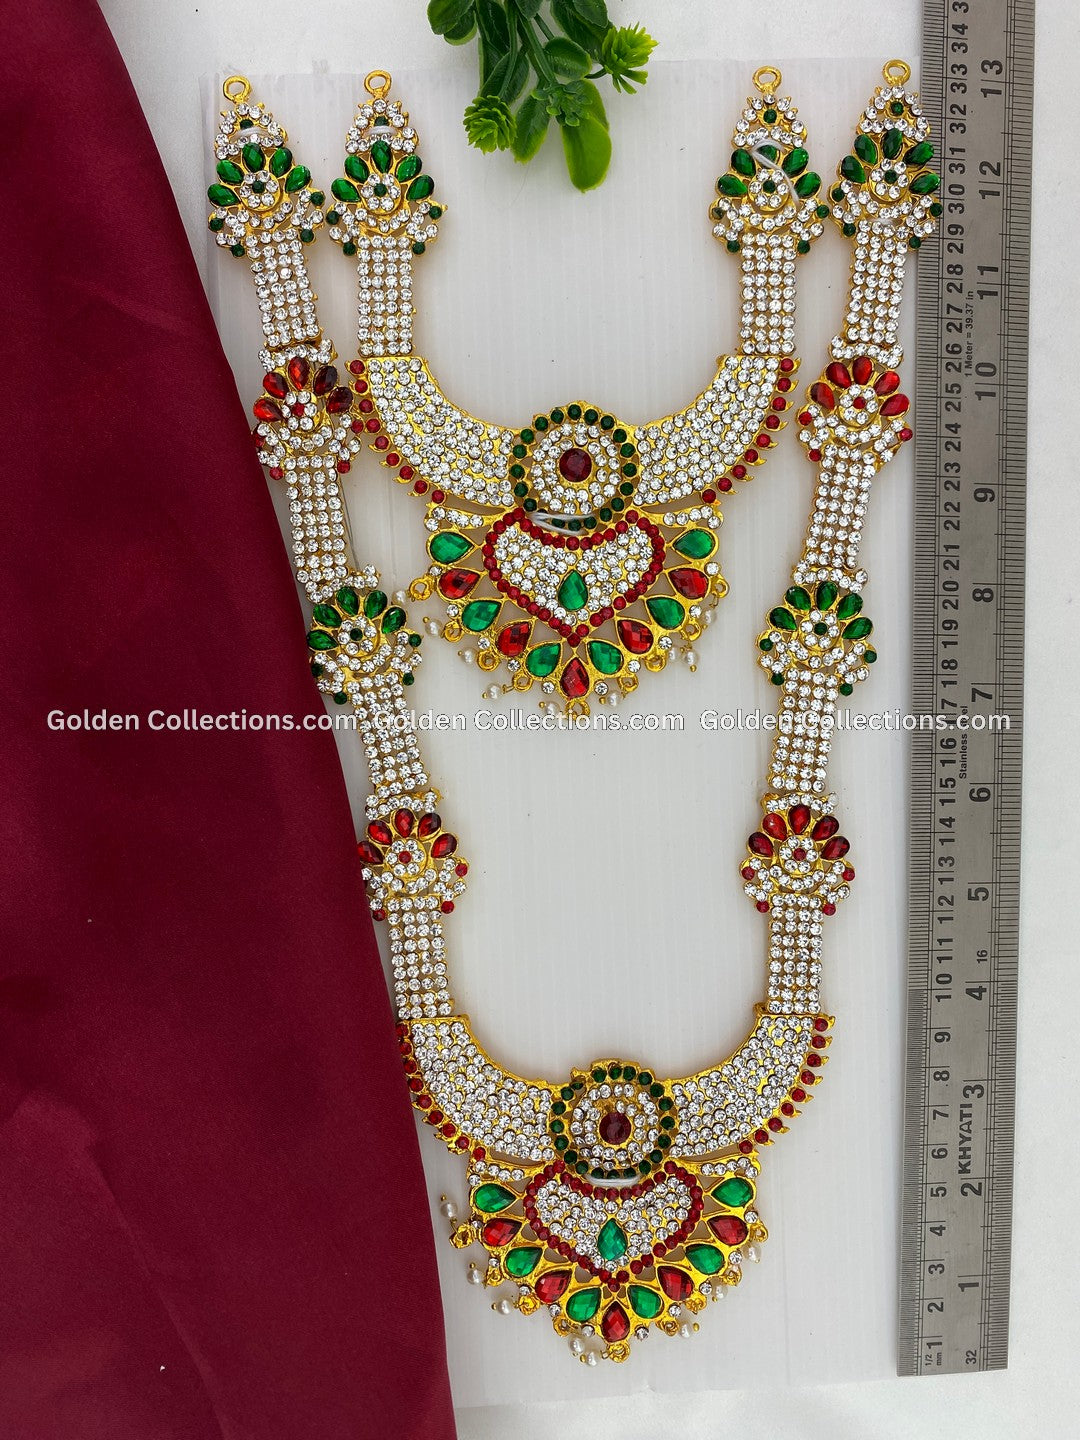 Temple Deity Long Necklace - Divine Opulence - GoldenCollections 2